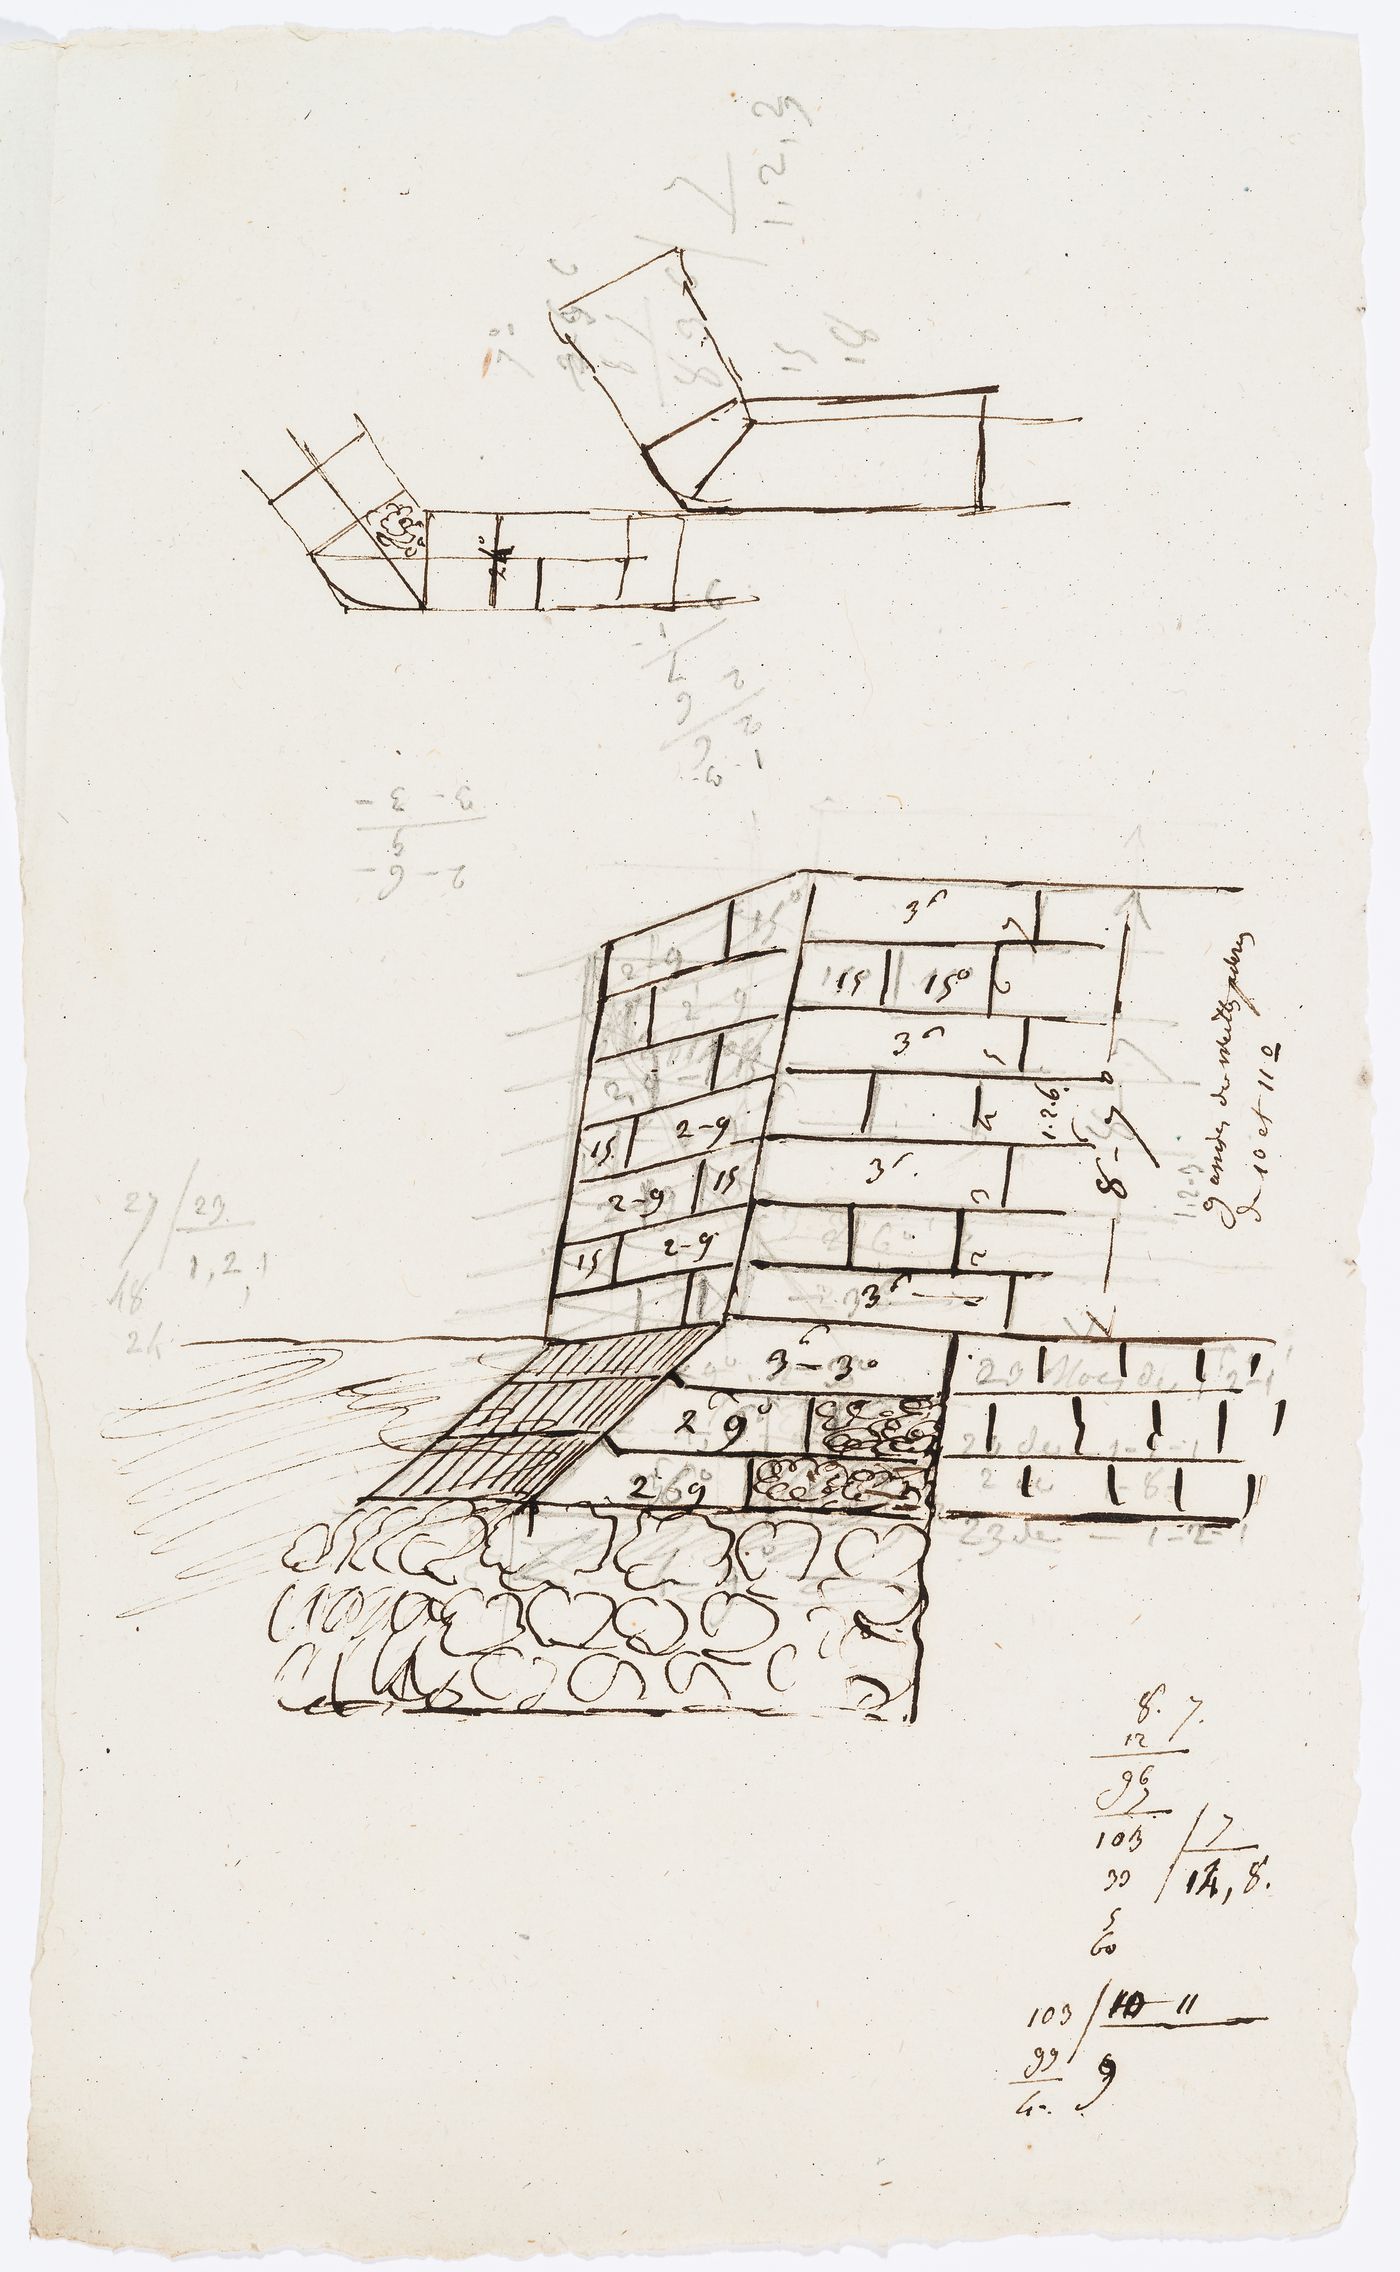 Sketch plans and axonometric drawing, possibly for a levee wall or a bridge abutment, Domaine de La Vallée